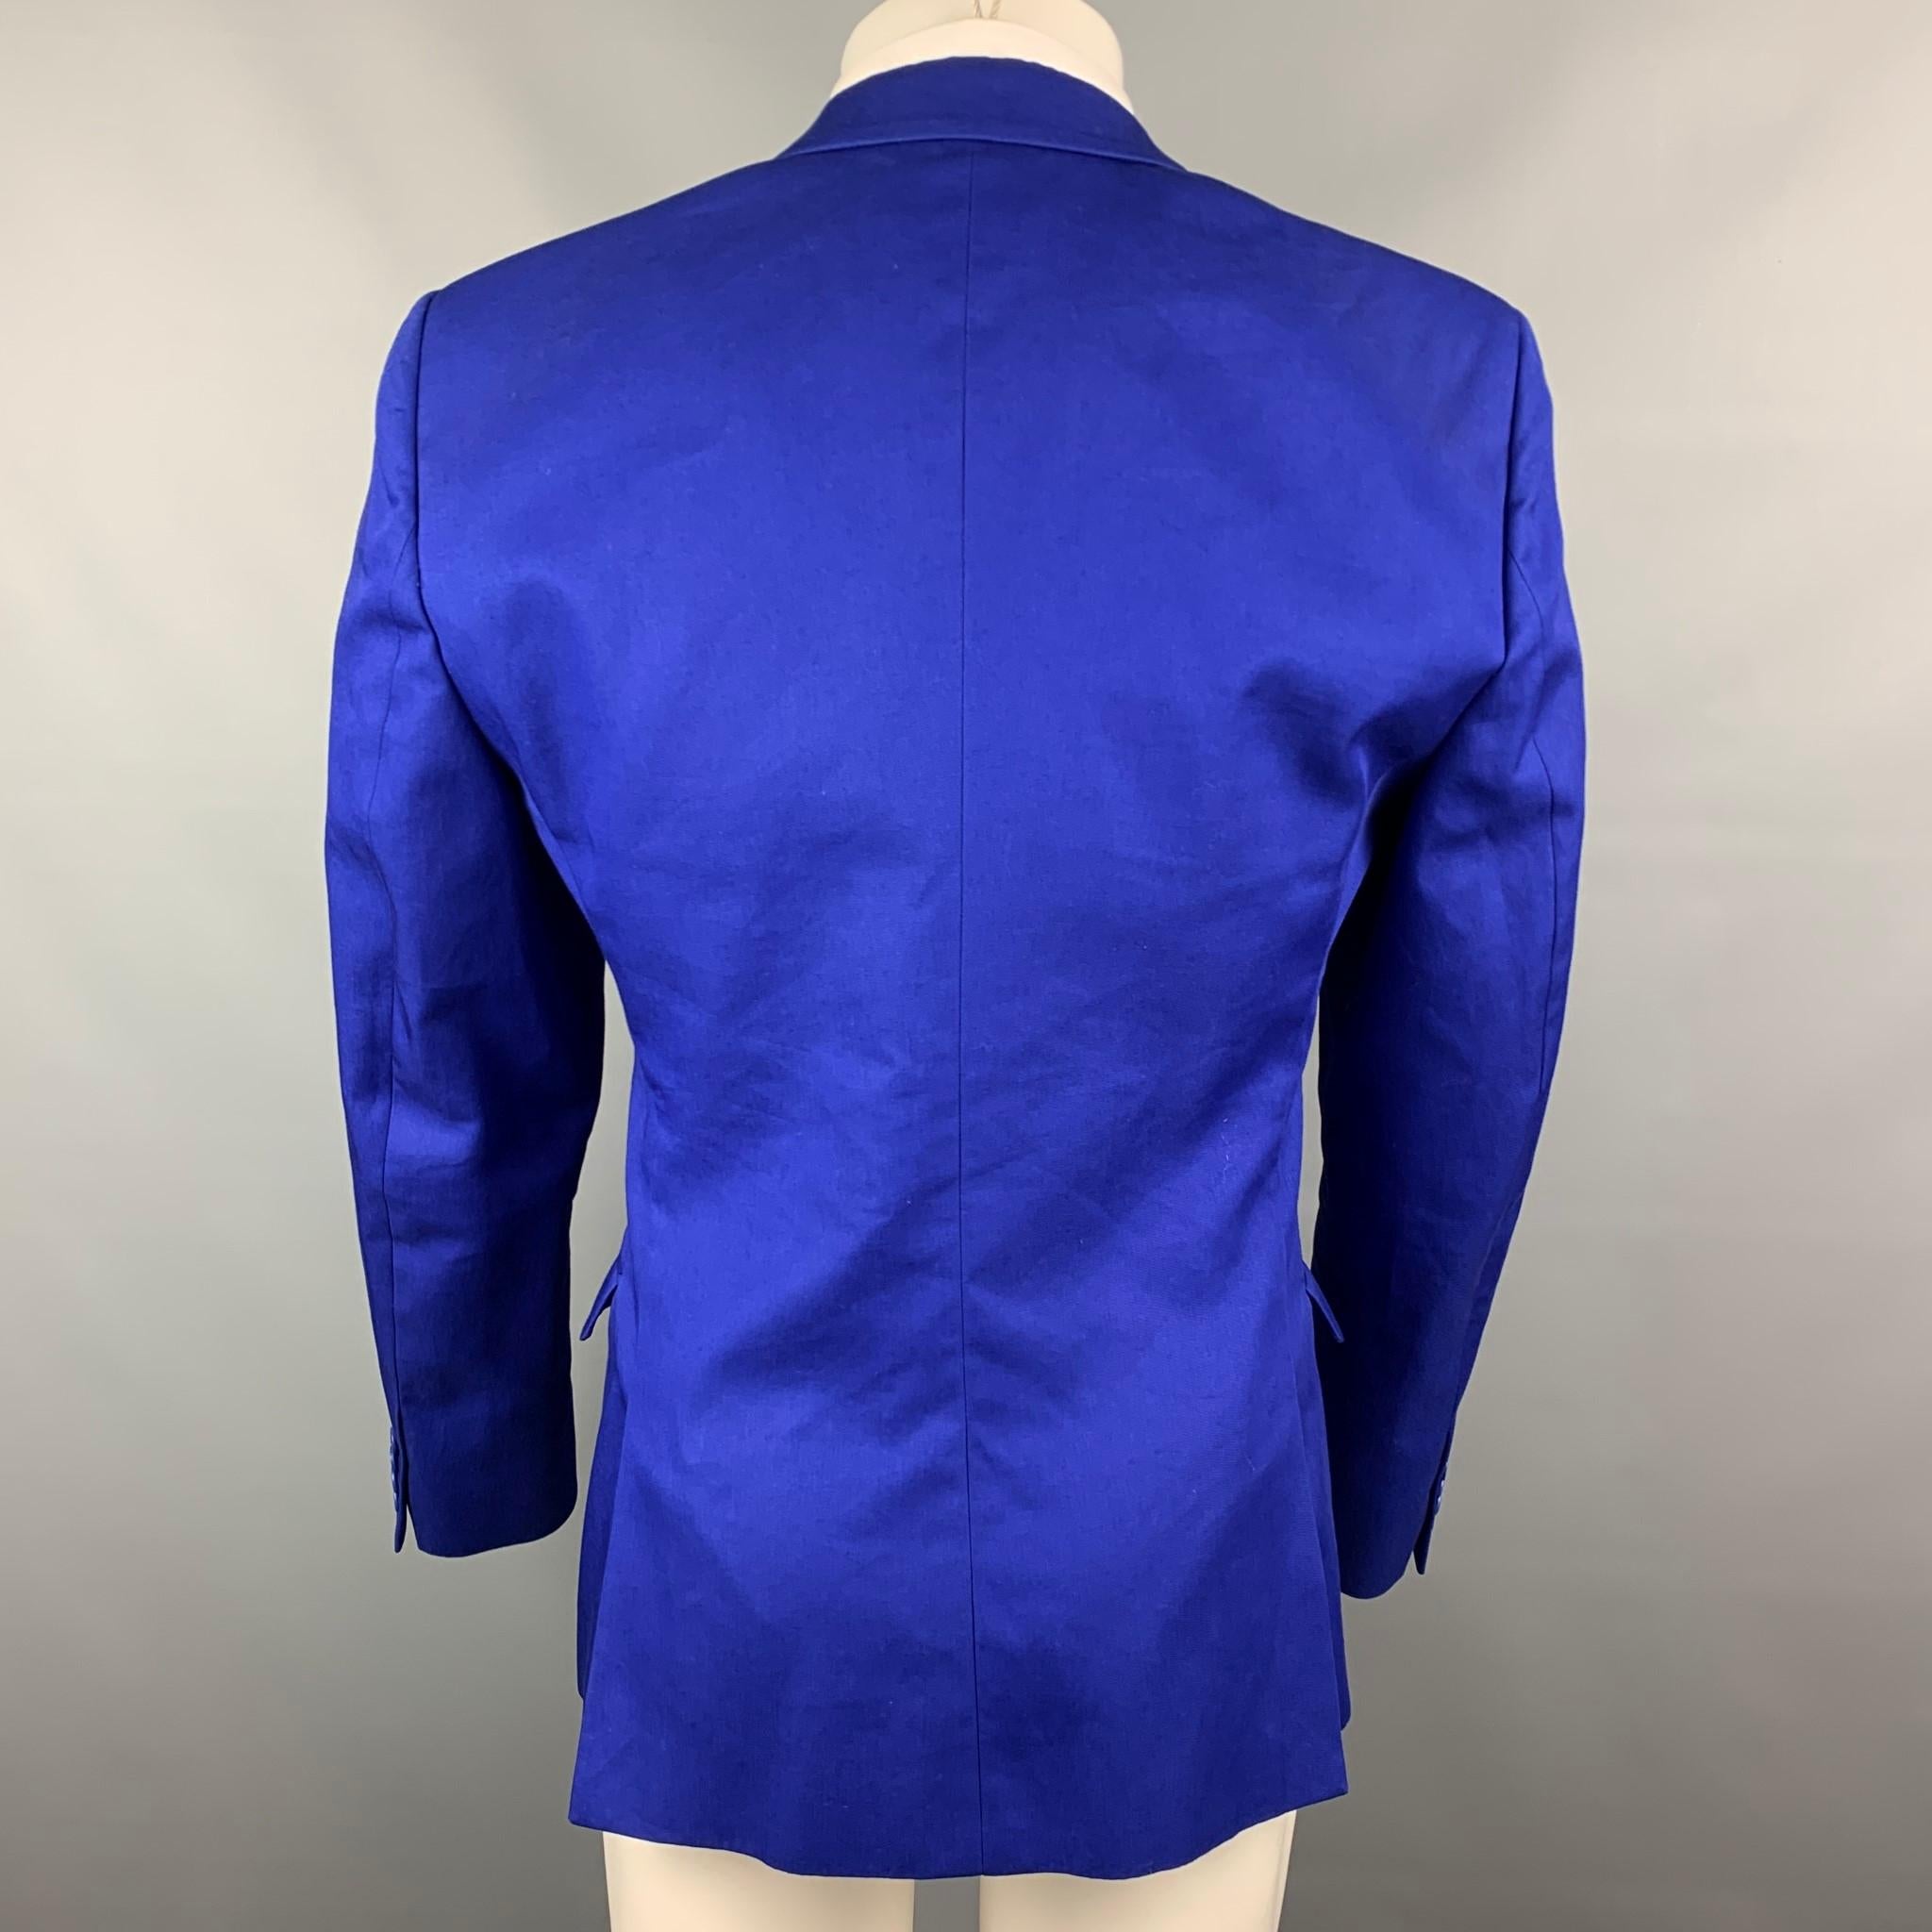 CALVIN KLEIN COLLECTION sport coat comes in a royal blue cotton / polyester with a full liner featuring a notch lapel, flap pockets, and a double button closure.

Very Good Pre-Owned Condition.
Marked: 50/40

Measurements:

Shoulder: 18 in.
Chest: